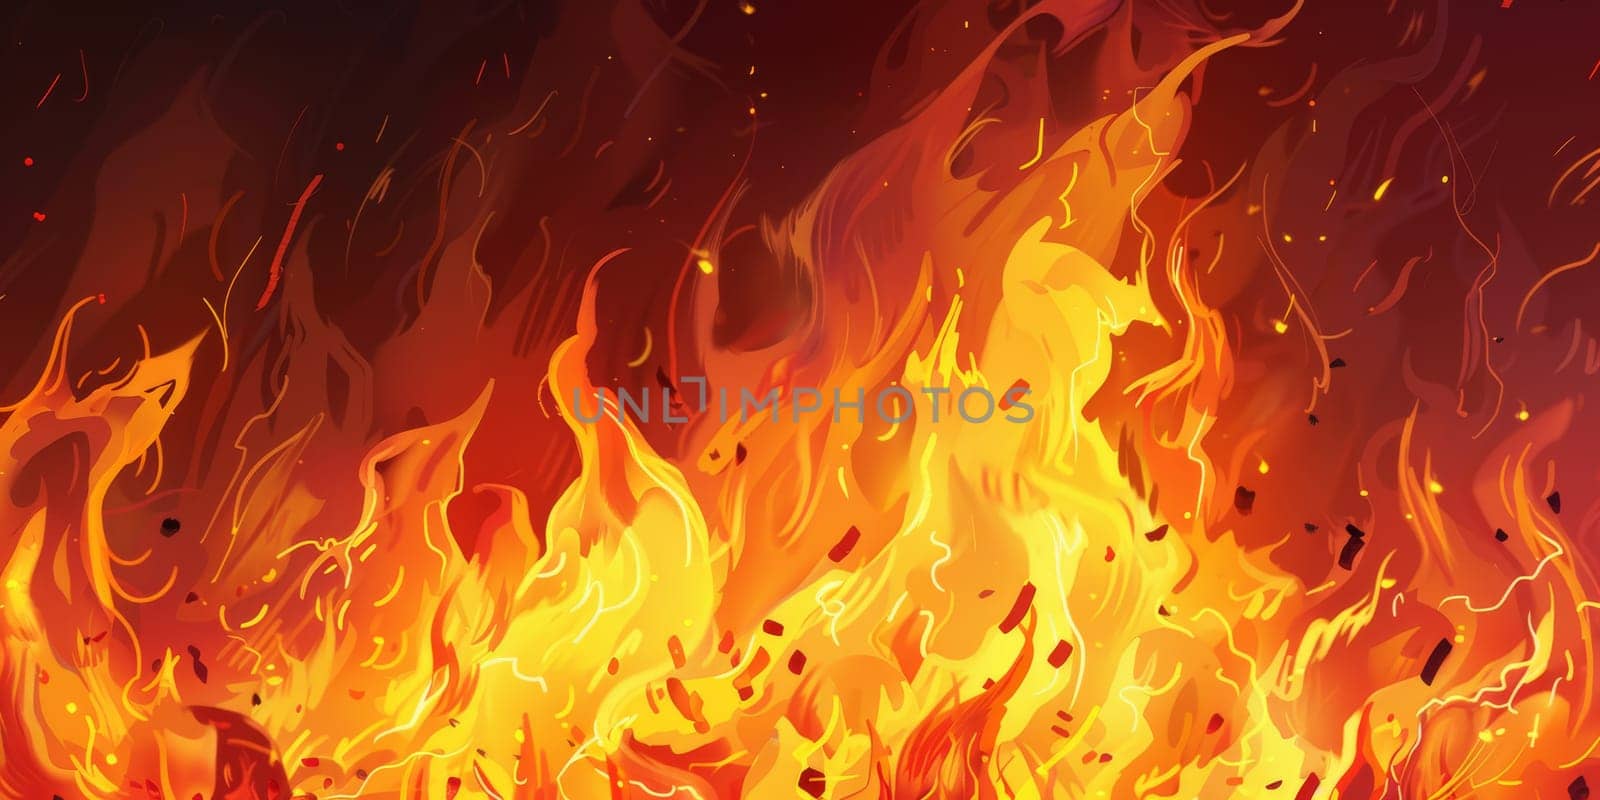 A close-up view of a fire with a numerous intense flames burning fiercely